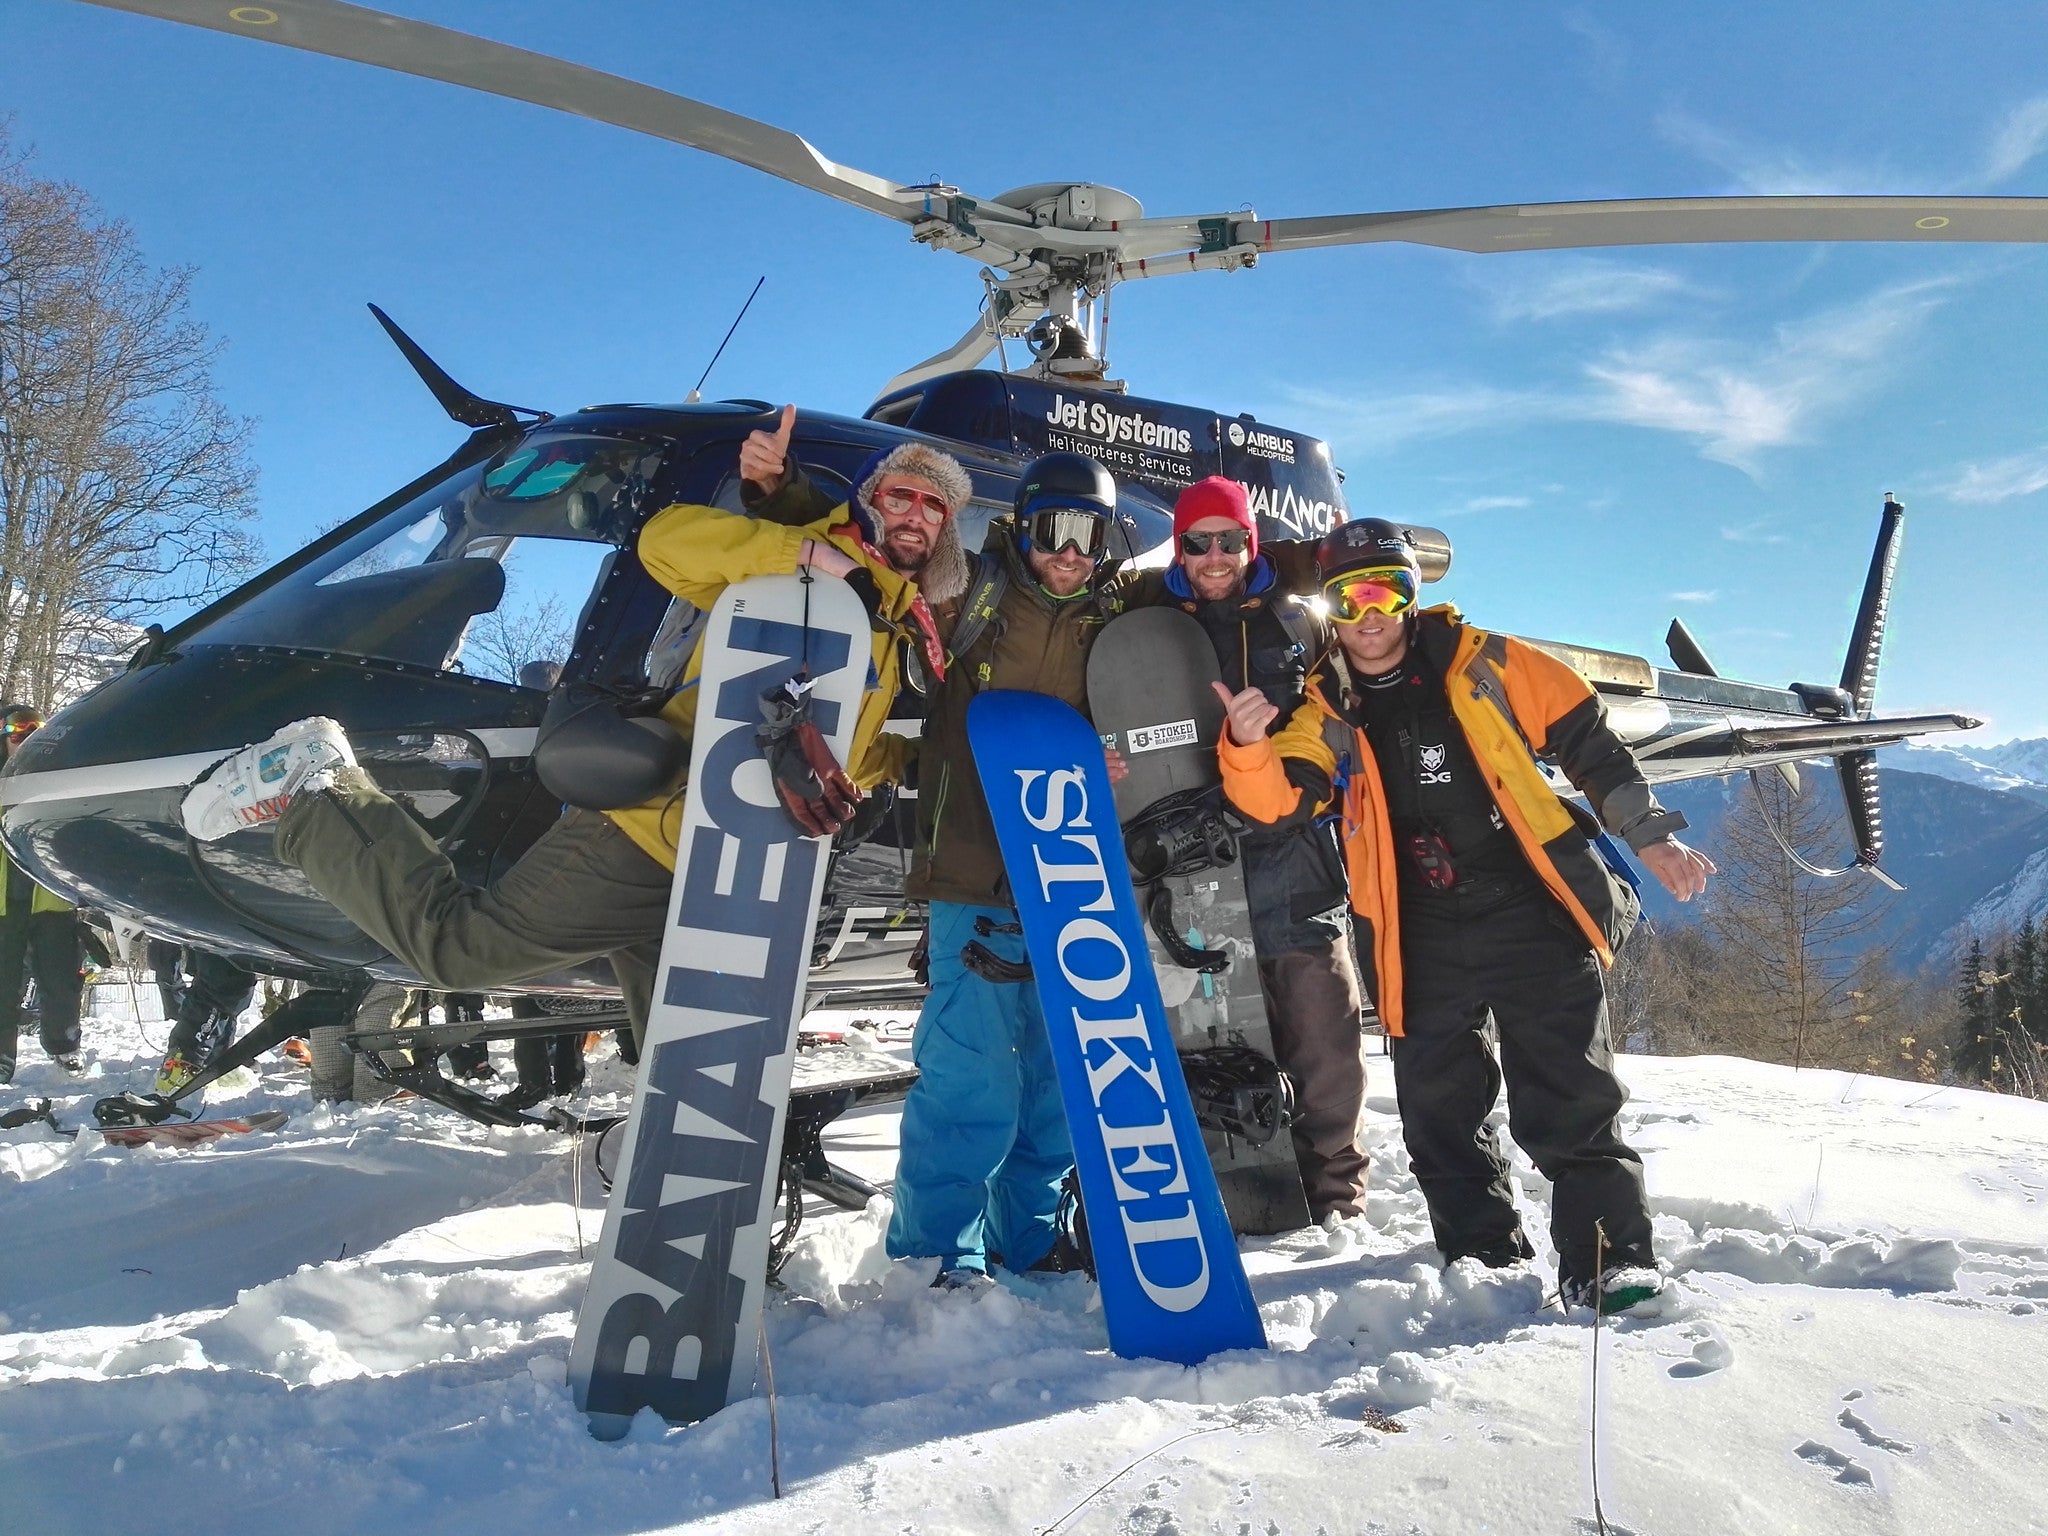 Team Stoked goes heli dropping